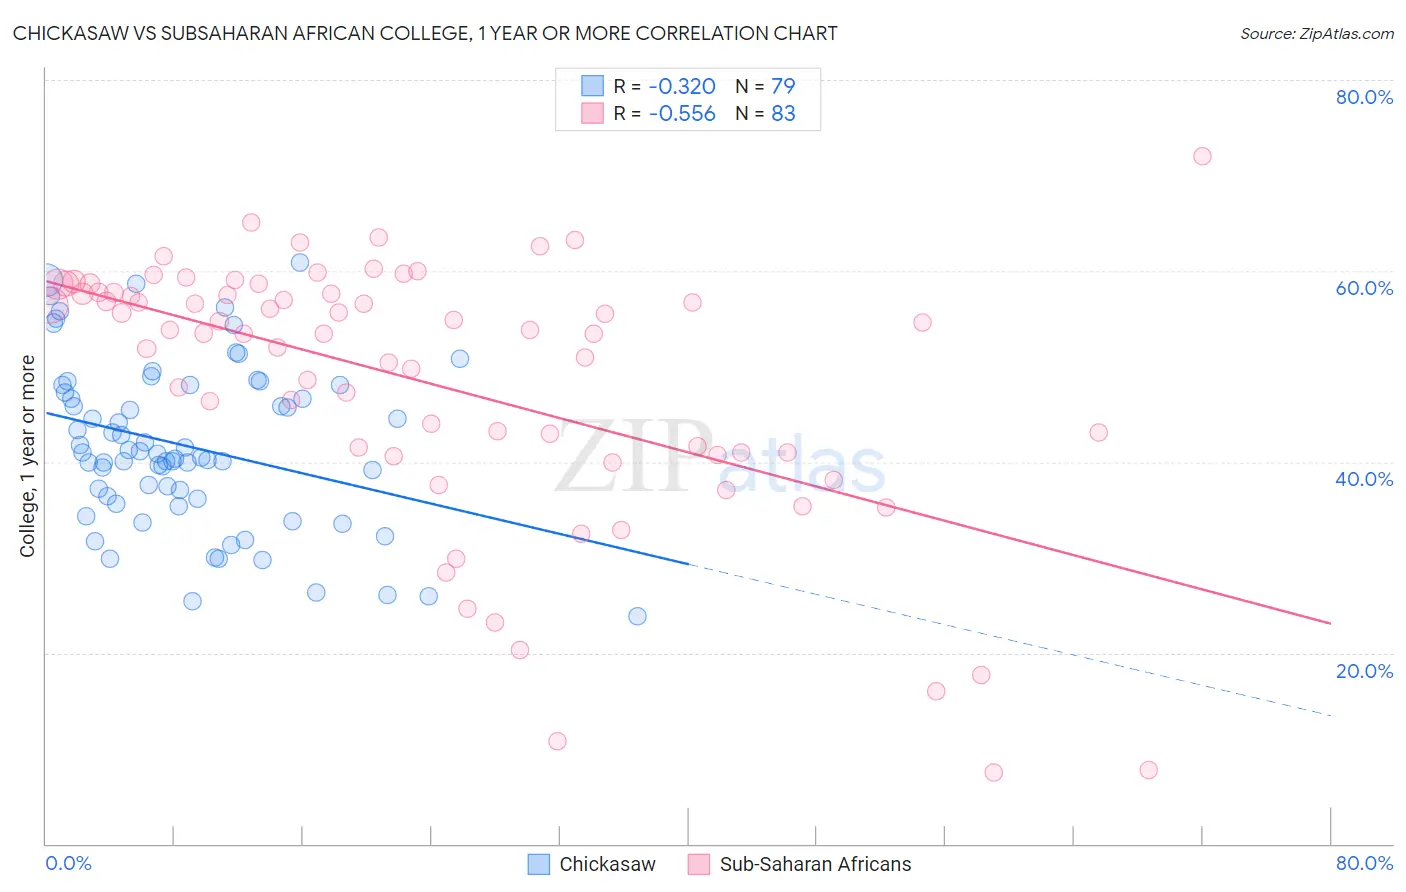 Chickasaw vs Subsaharan African College, 1 year or more